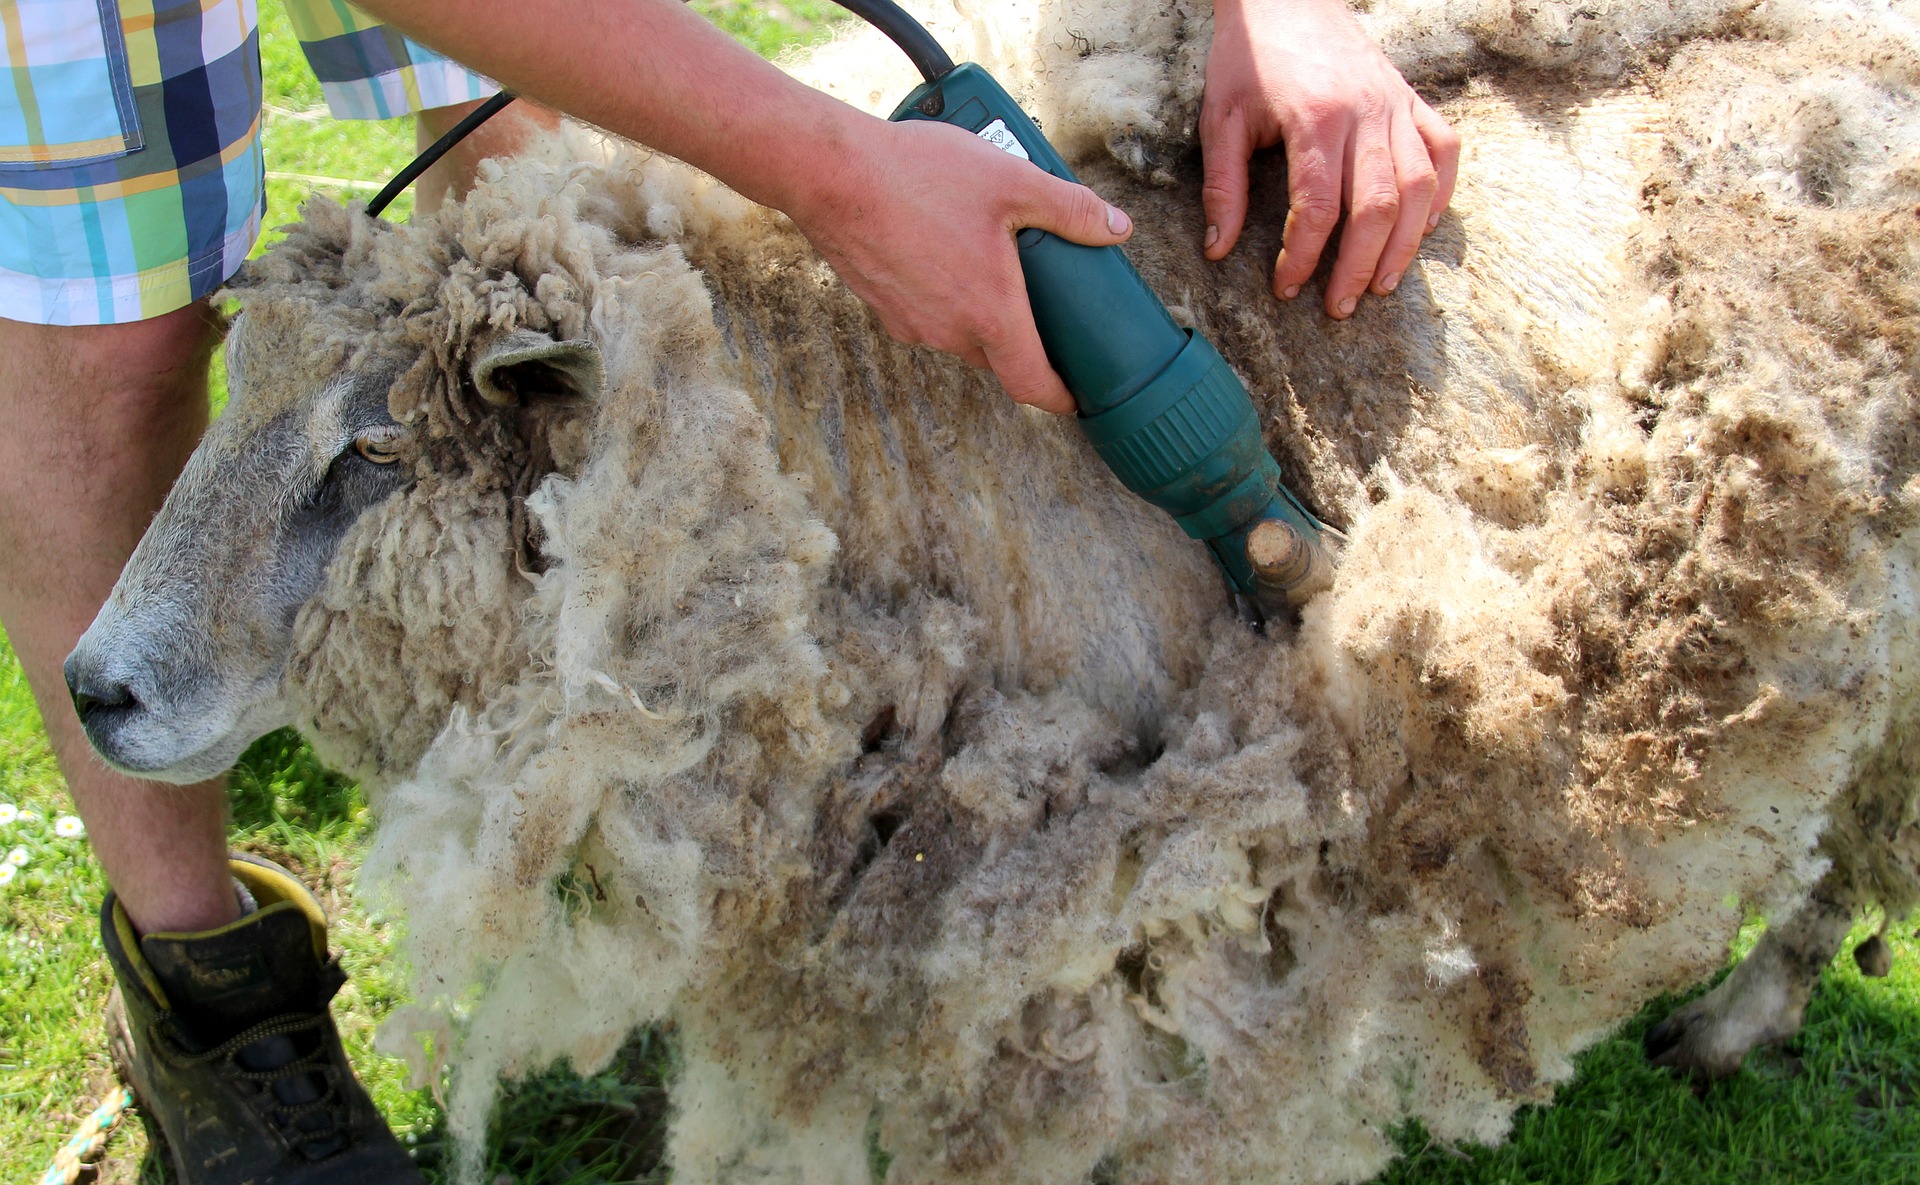 Can you shear sheep with human clippers?